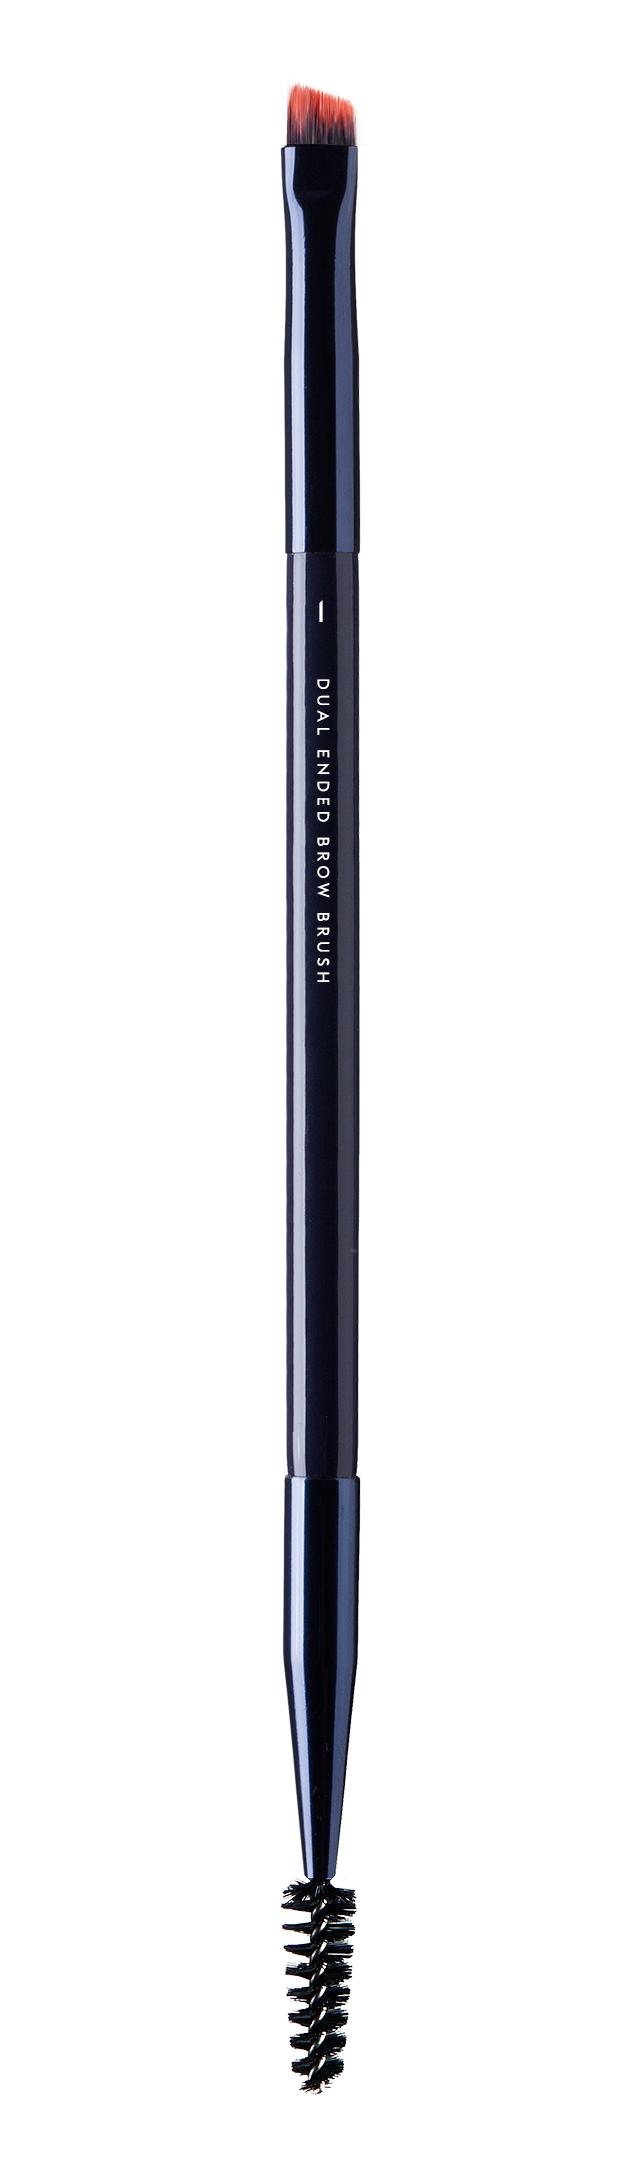 DUAL ENDED BROW BRUSH - Dual-ended brow brush